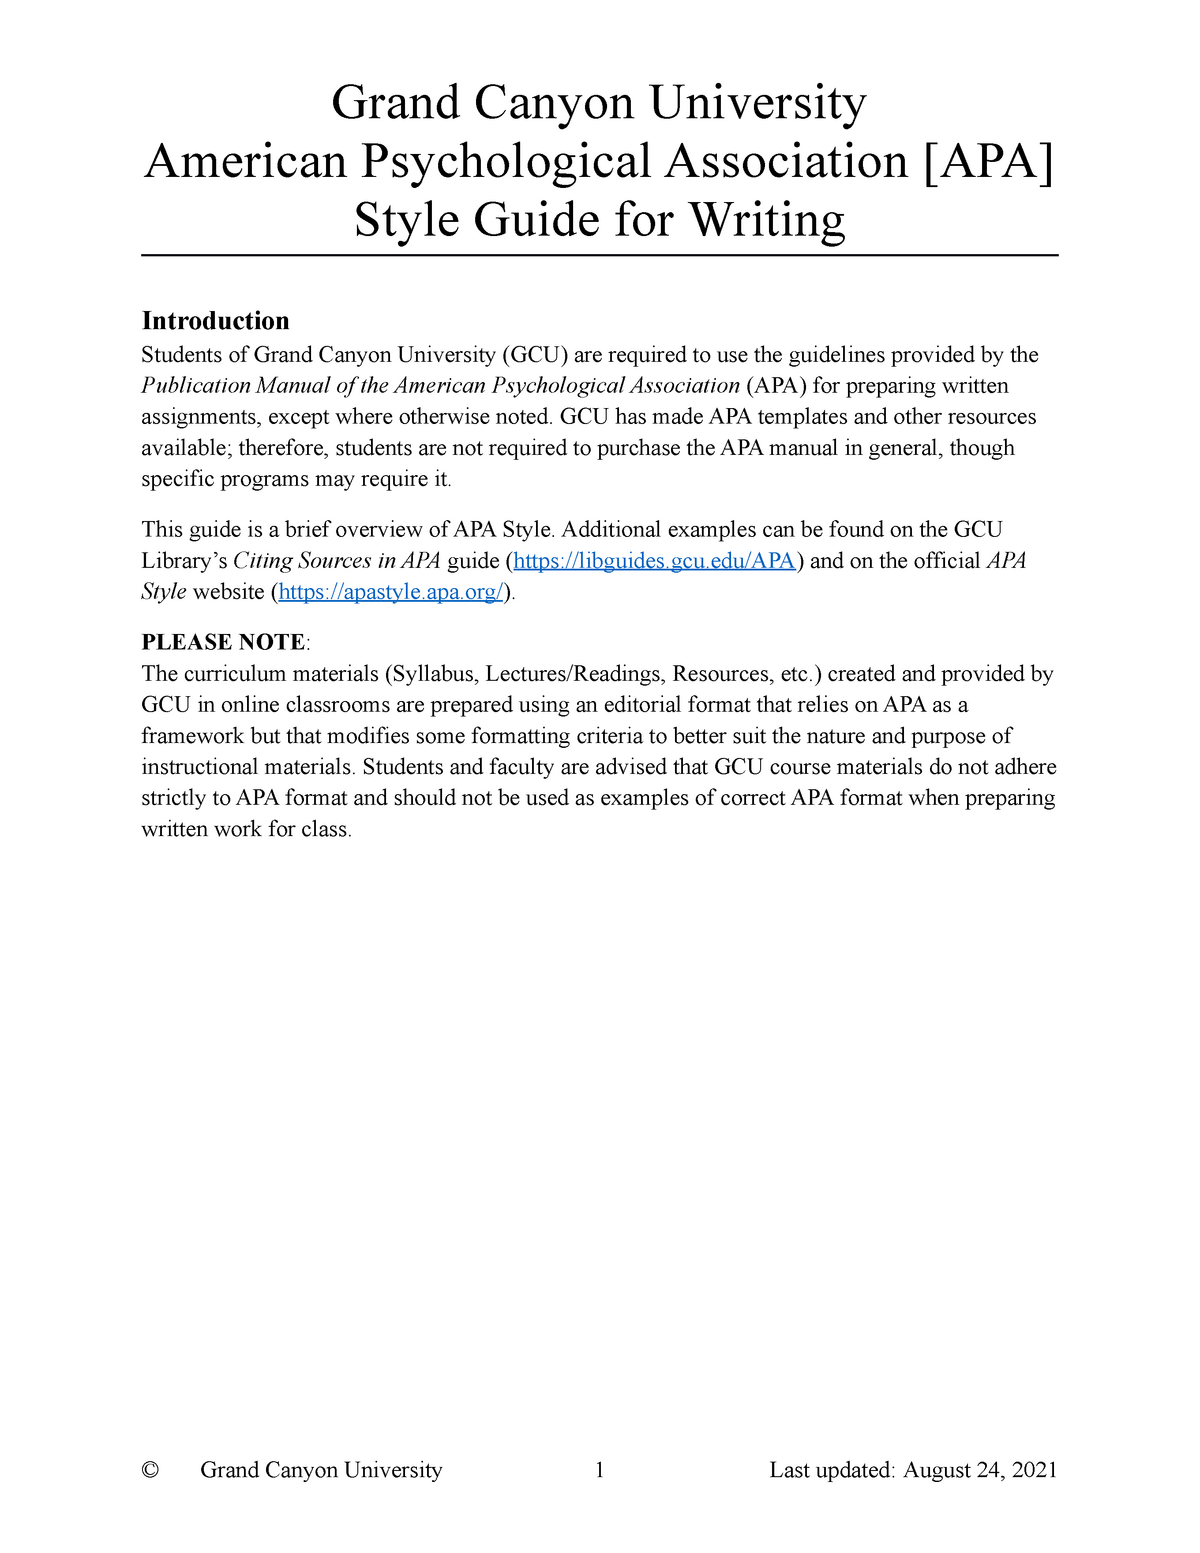 APA 7th edition style guide and such what - Grand Canyon University